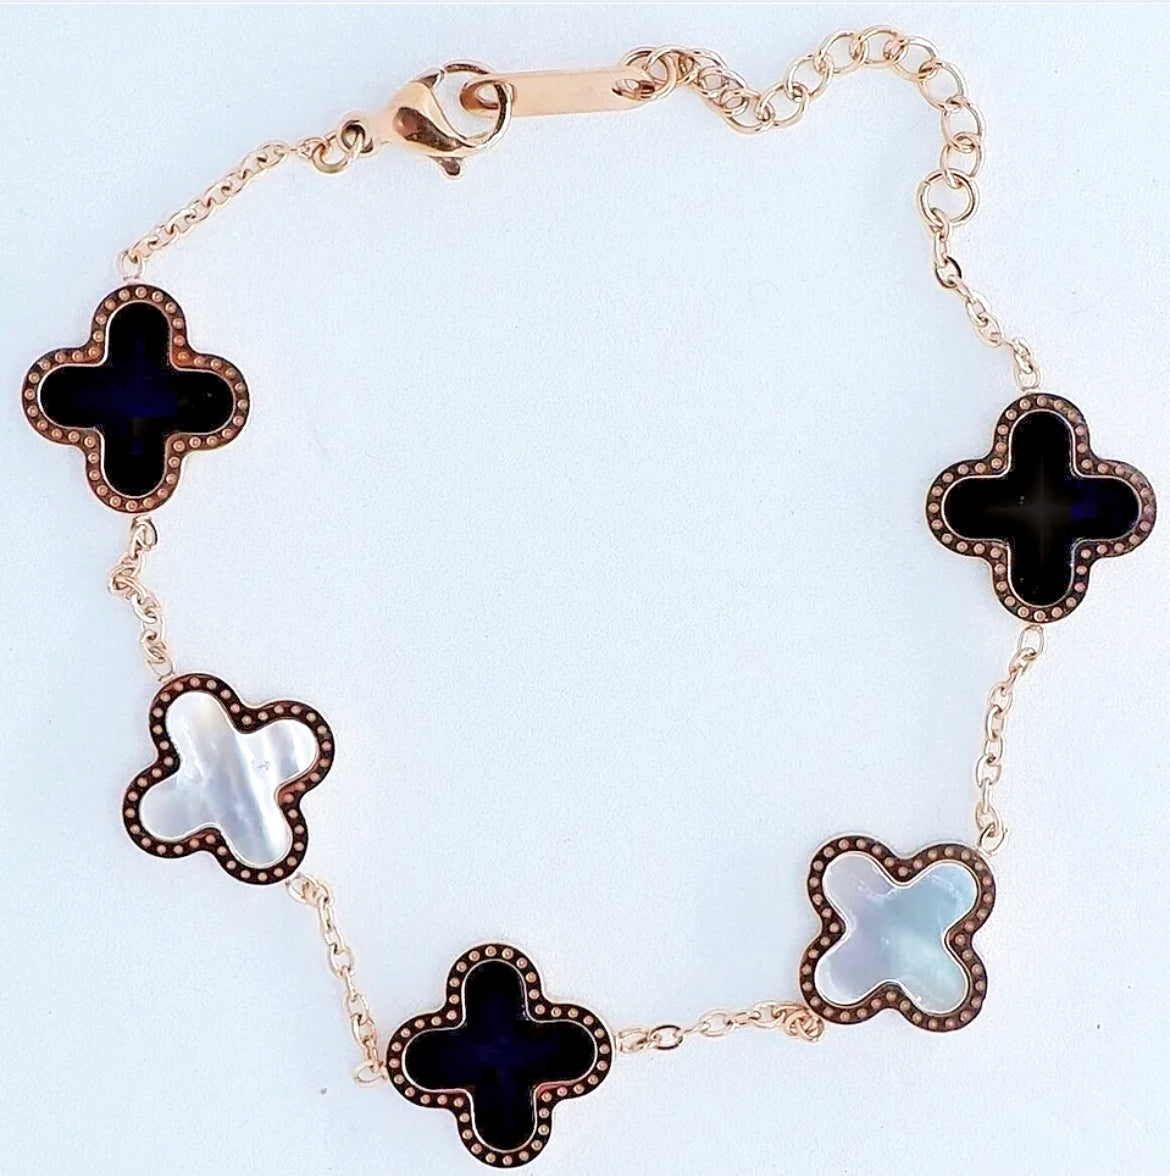 Nisa - 18K Gold Plated Clover Bracelet With Mixed Black Agate & Mother of Pearl Detail